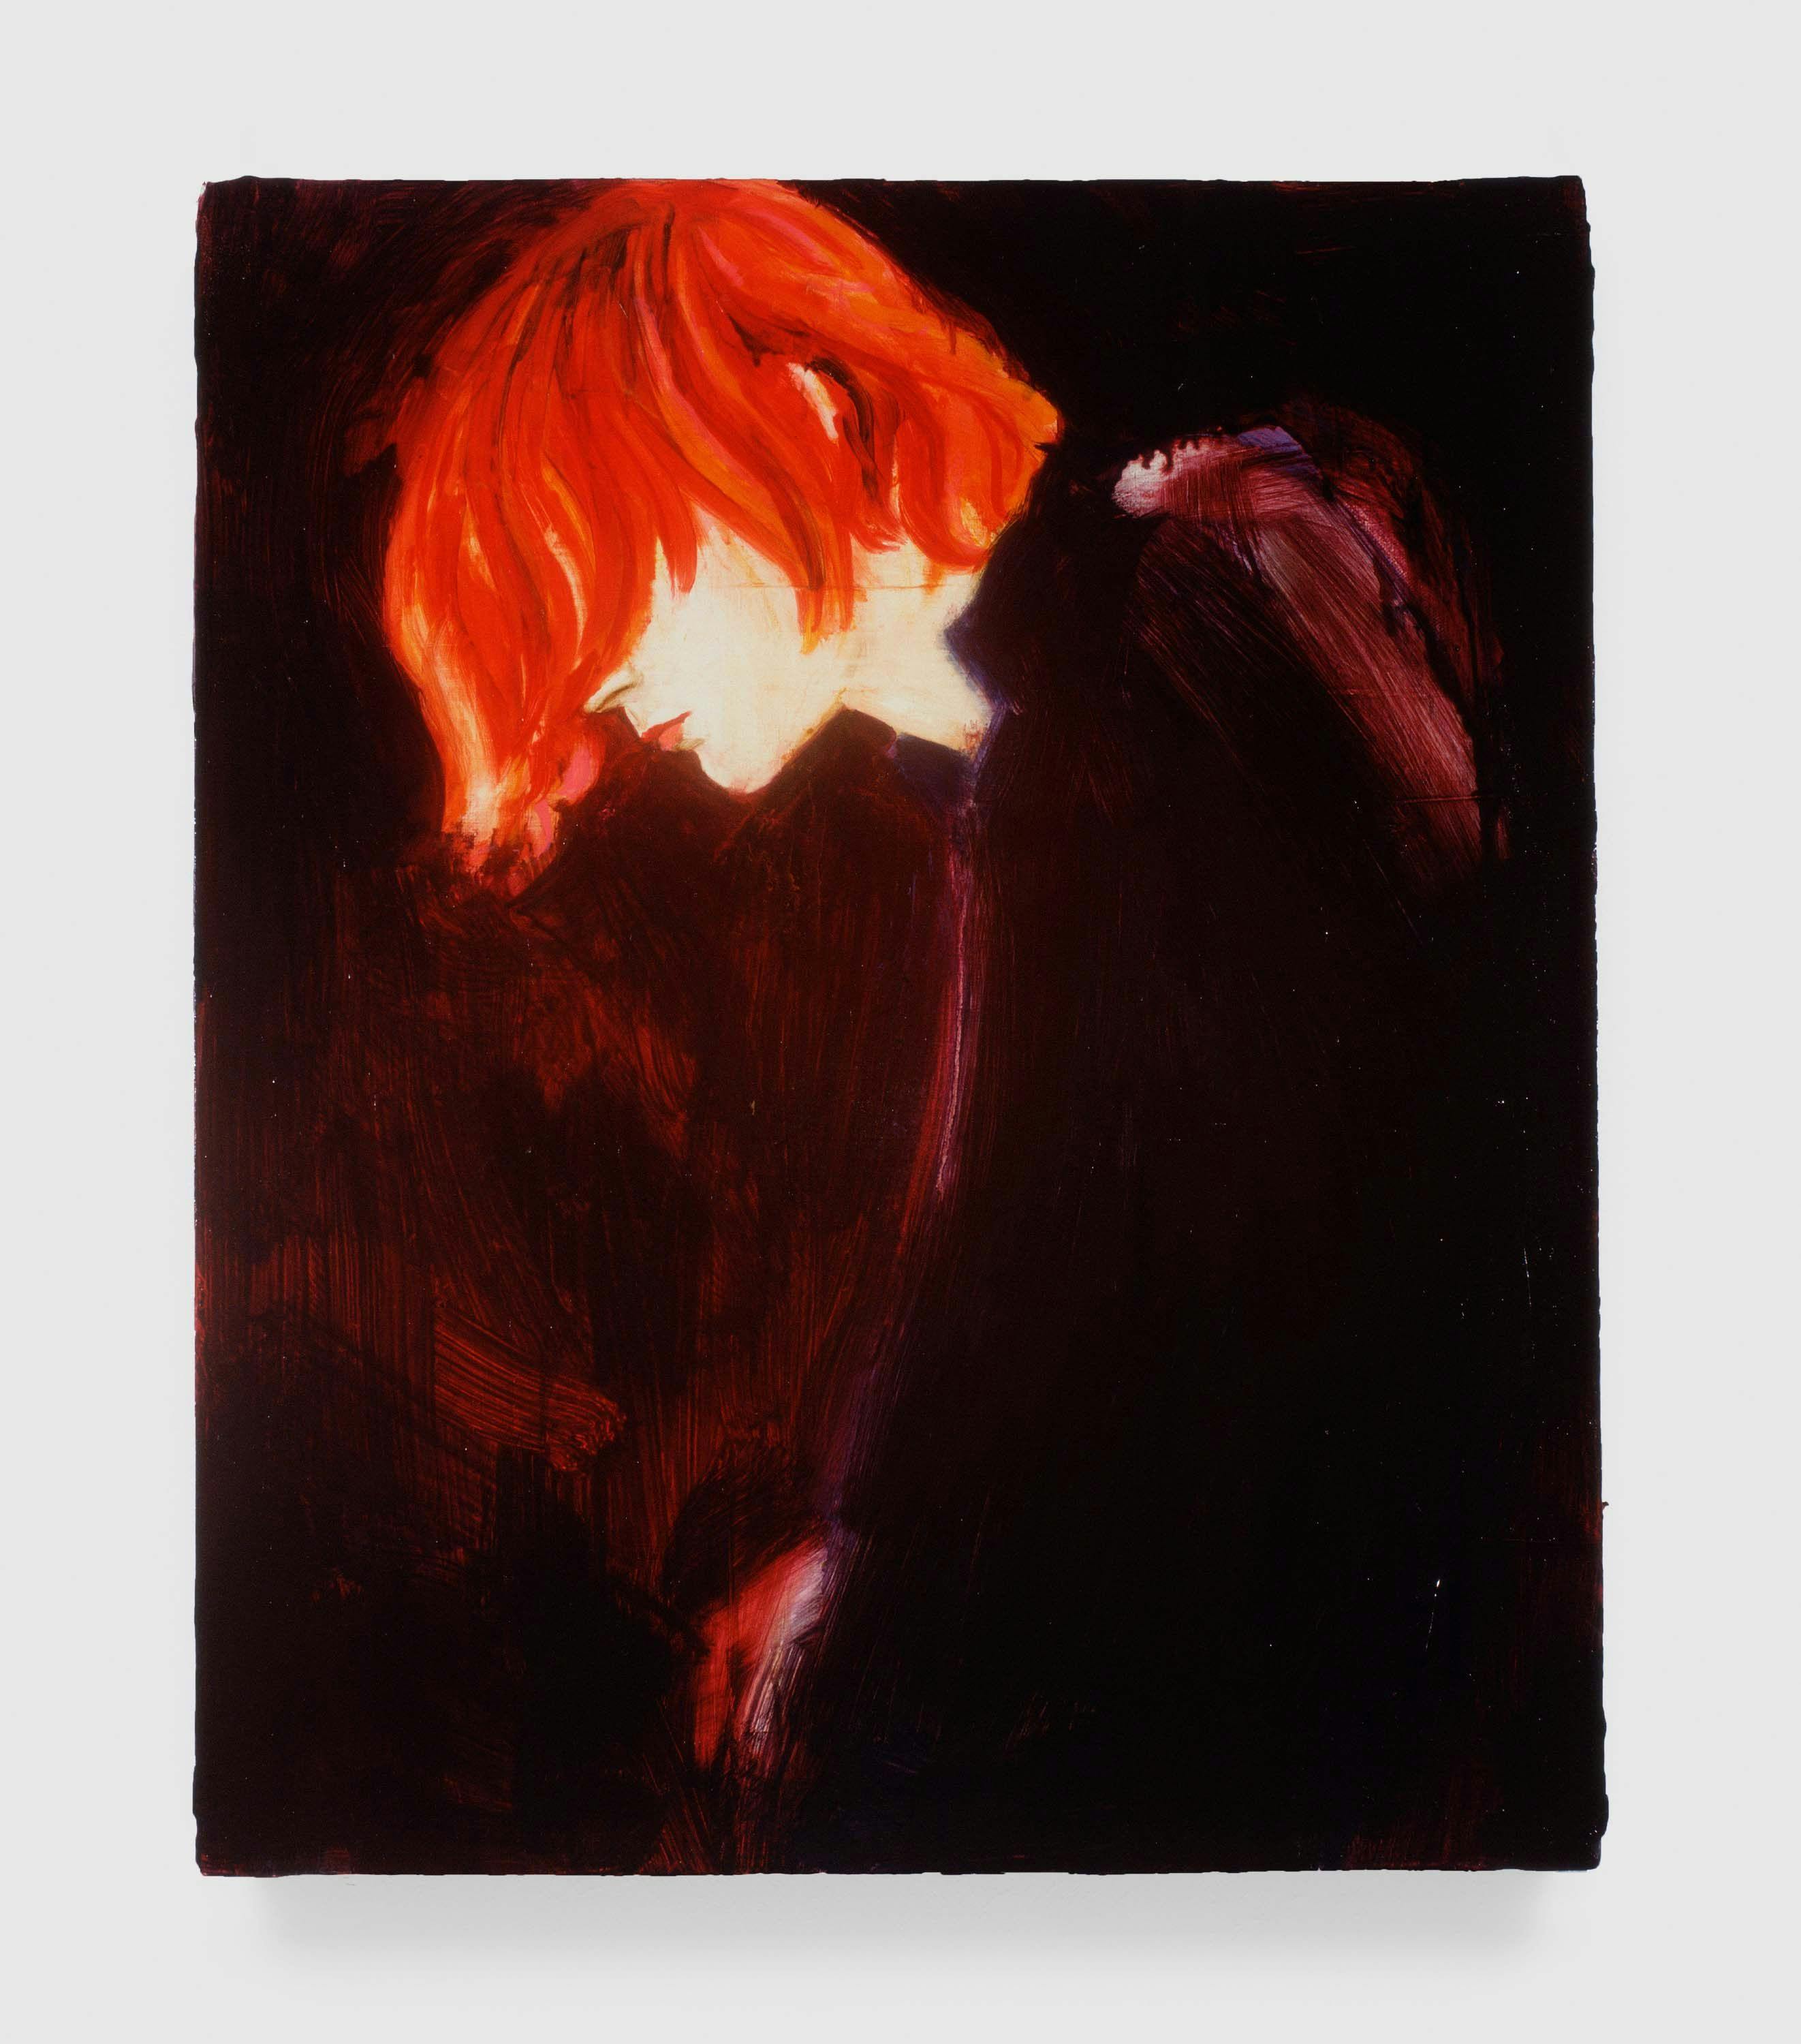 A painting by Elizabeth Peyton, titled Alizarin Kurt, dated 1995.